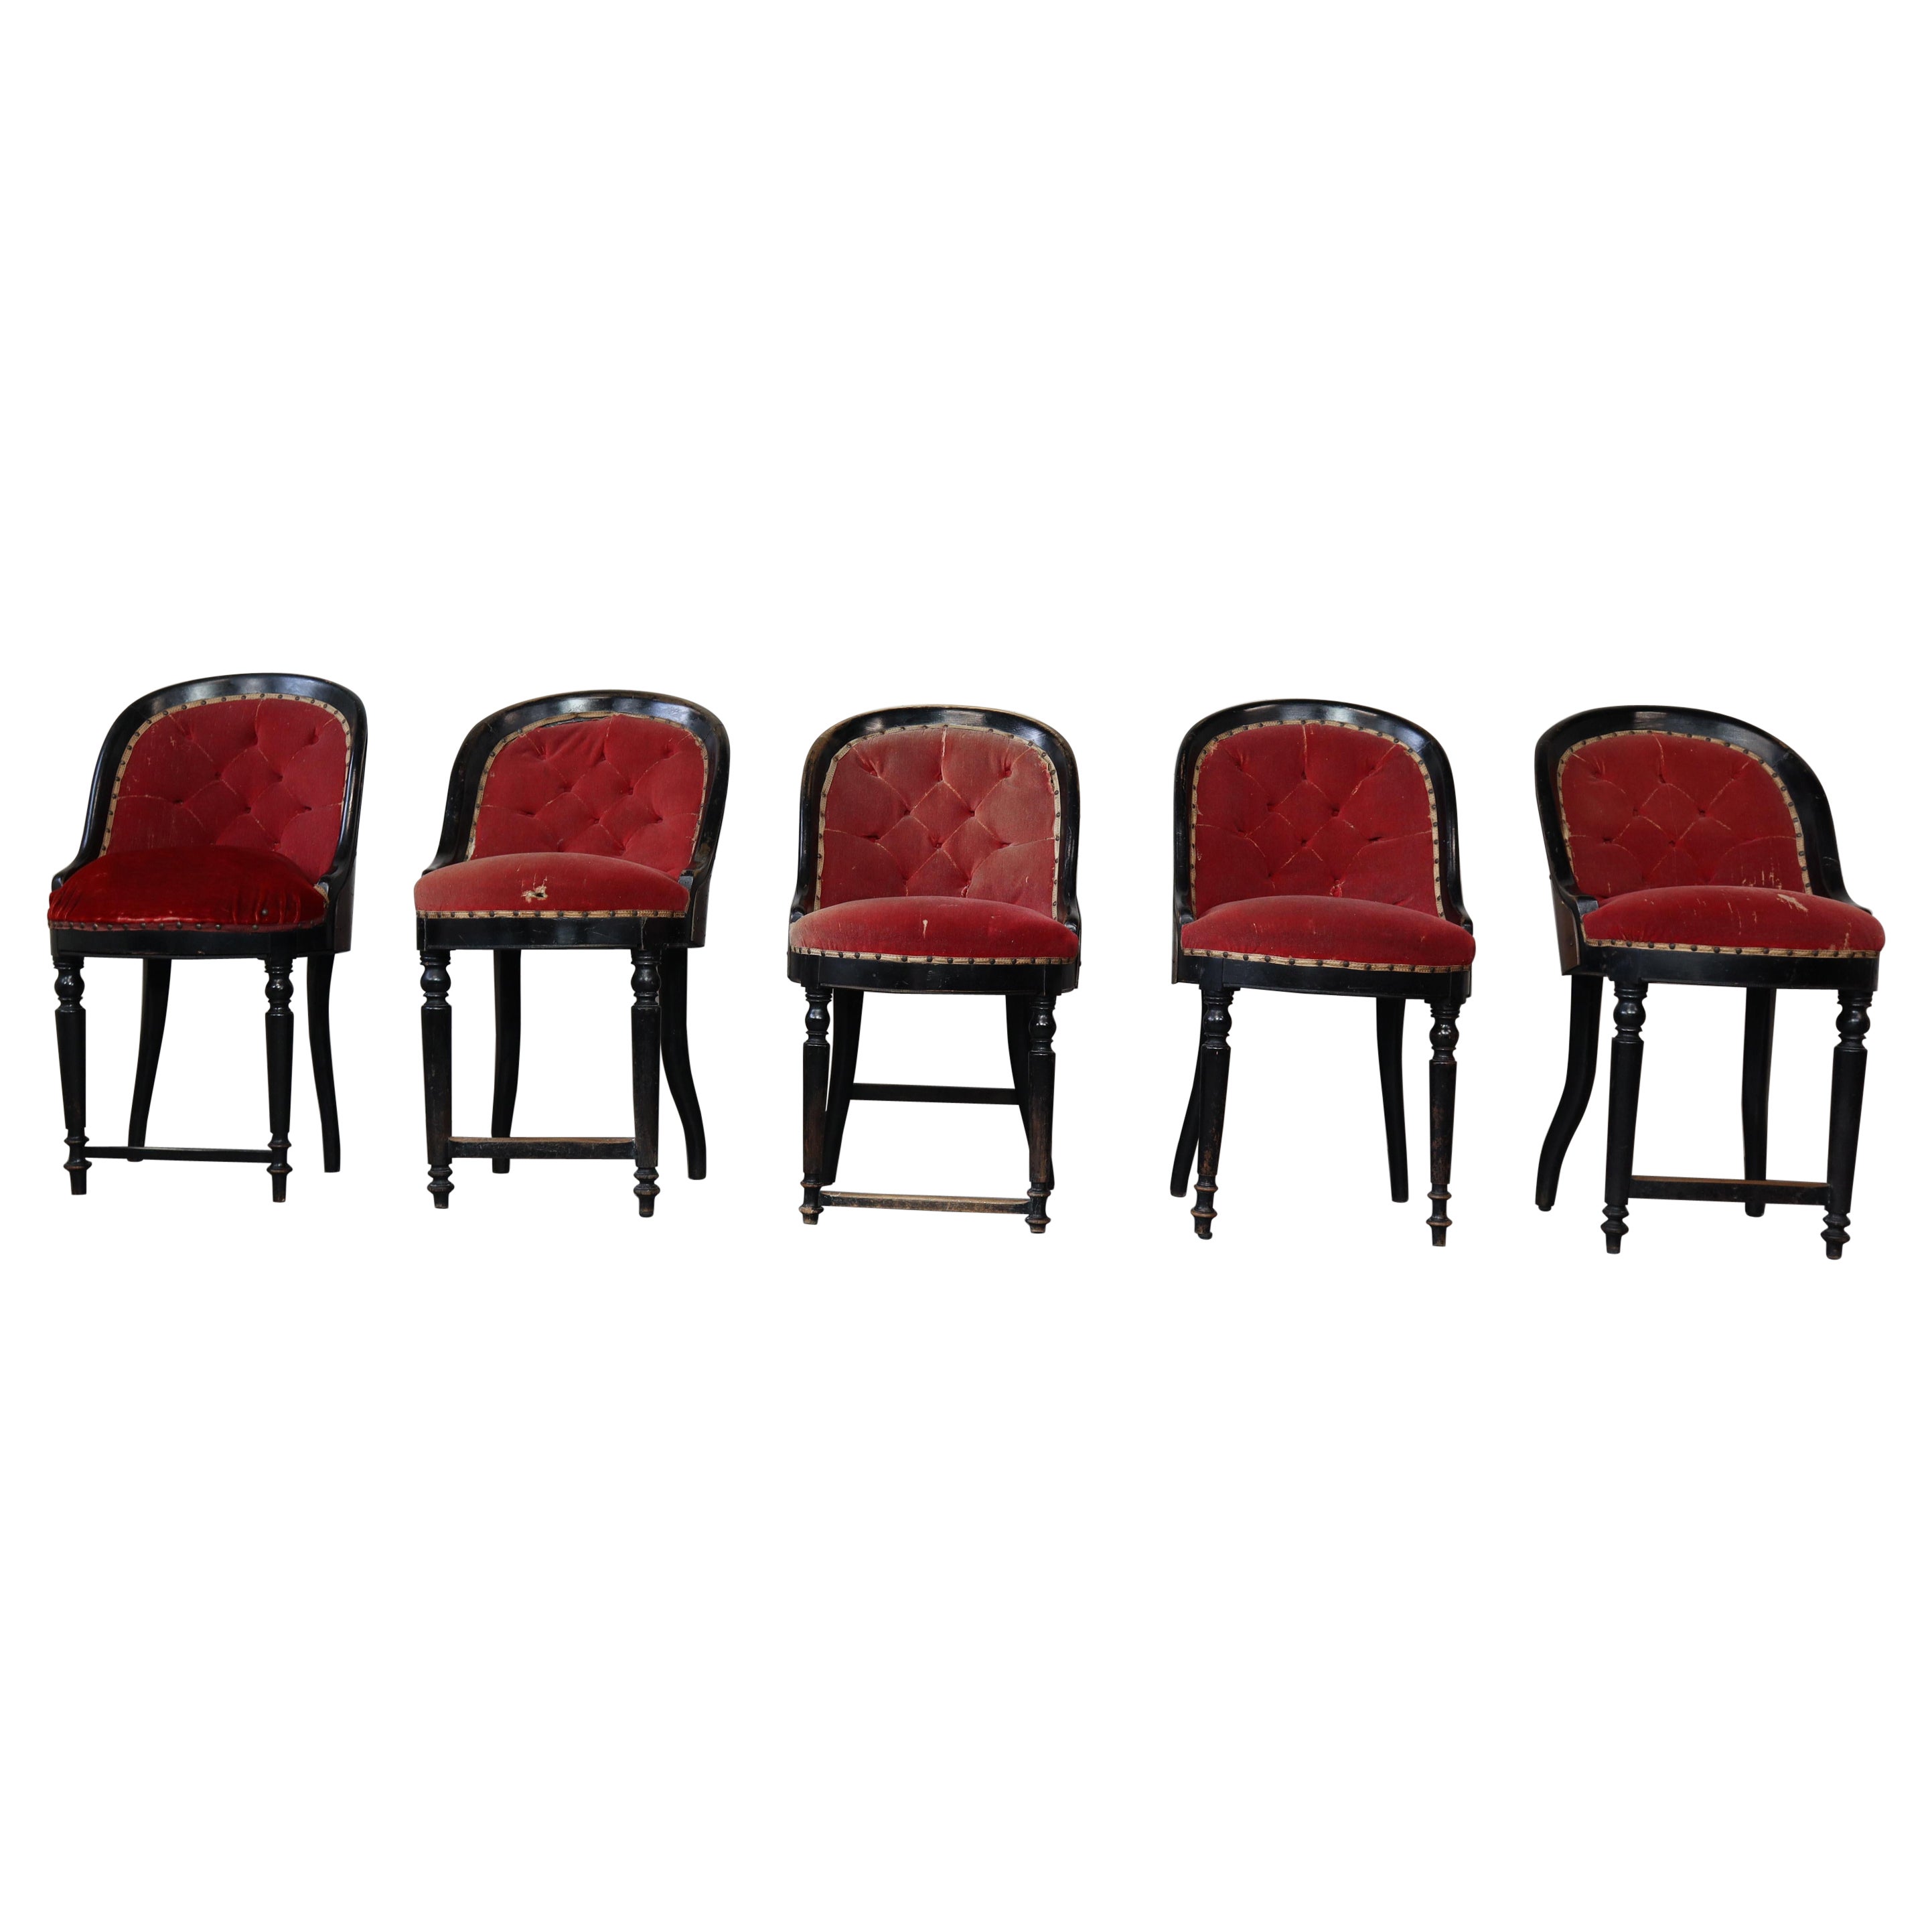 Set of Five Antique Theater Chairs For Sale